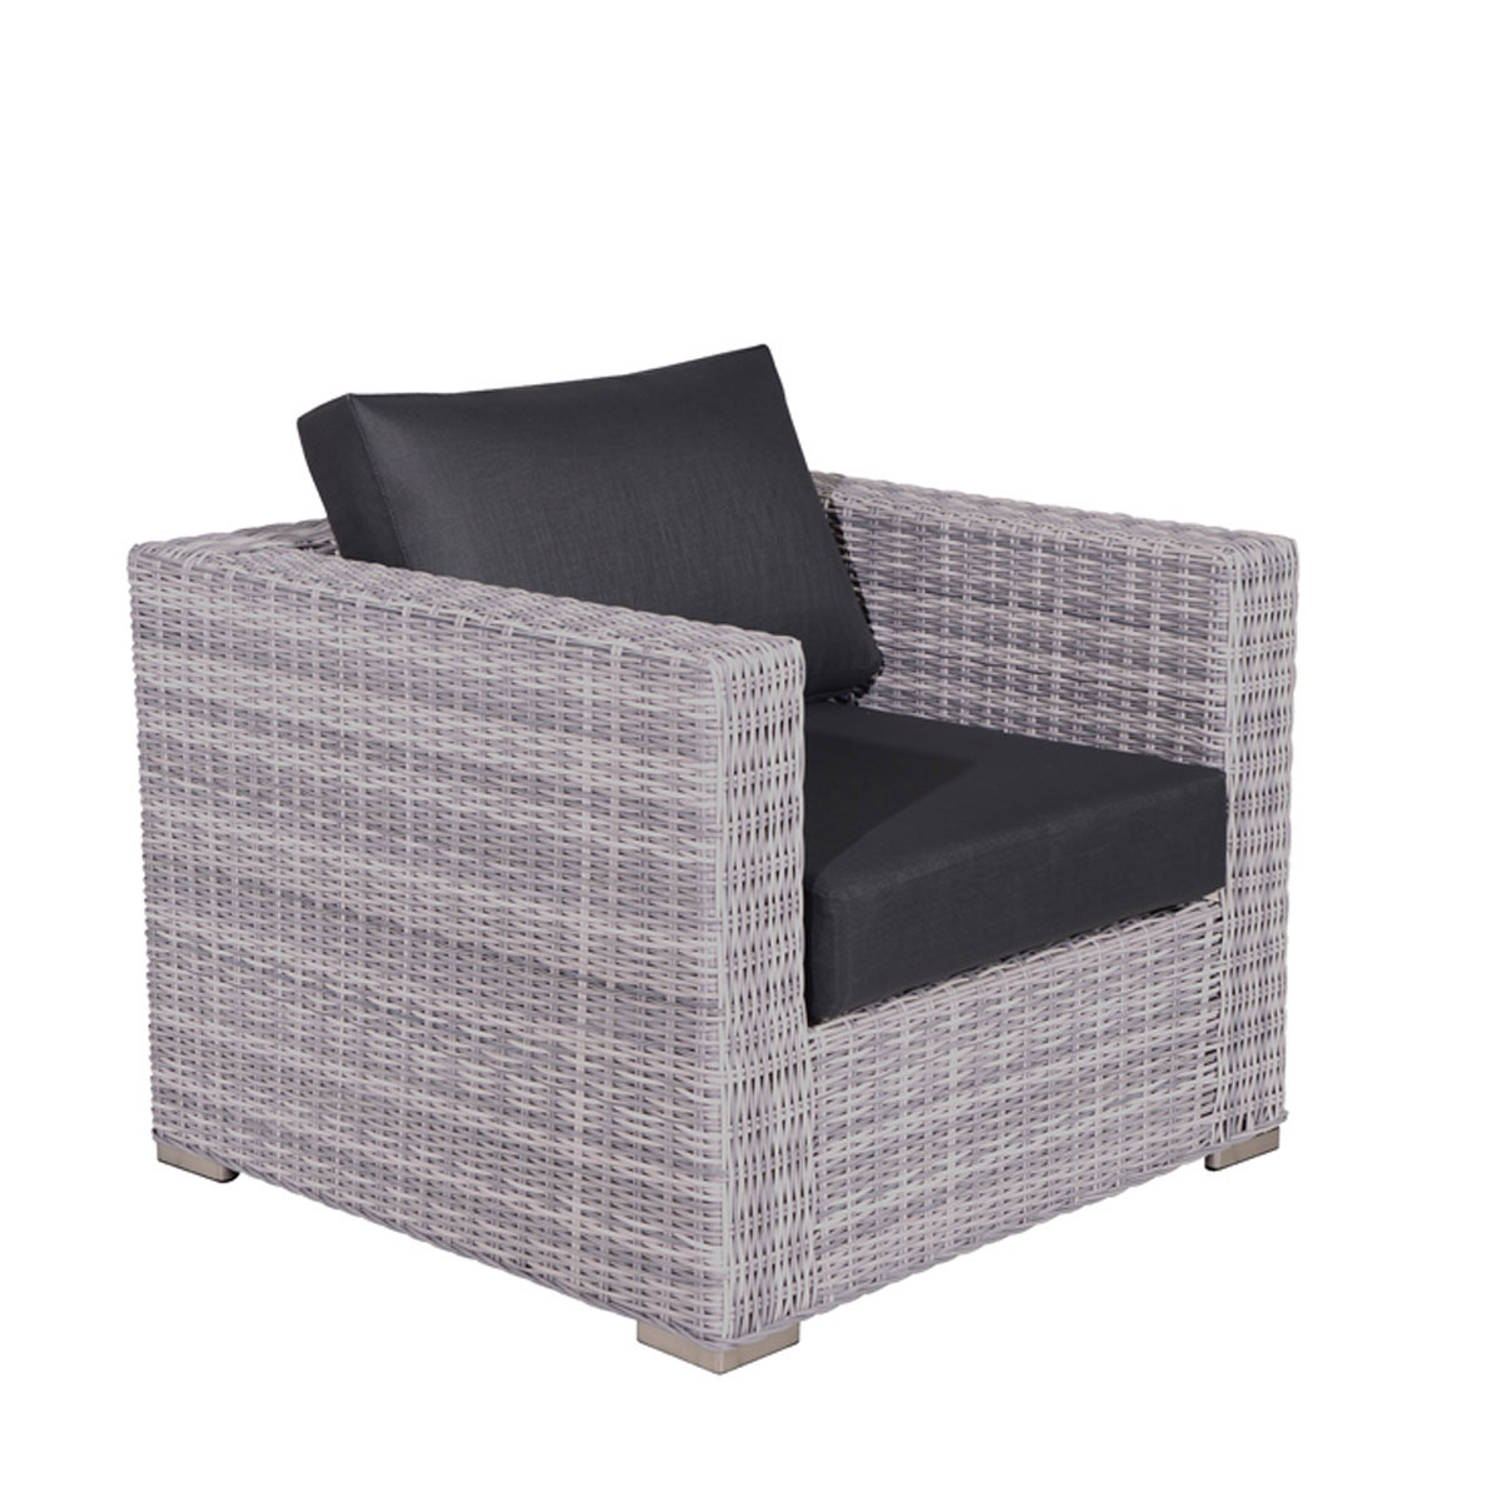 Tennessee lounge fauteuil cloudy Grijs Garden Impressions